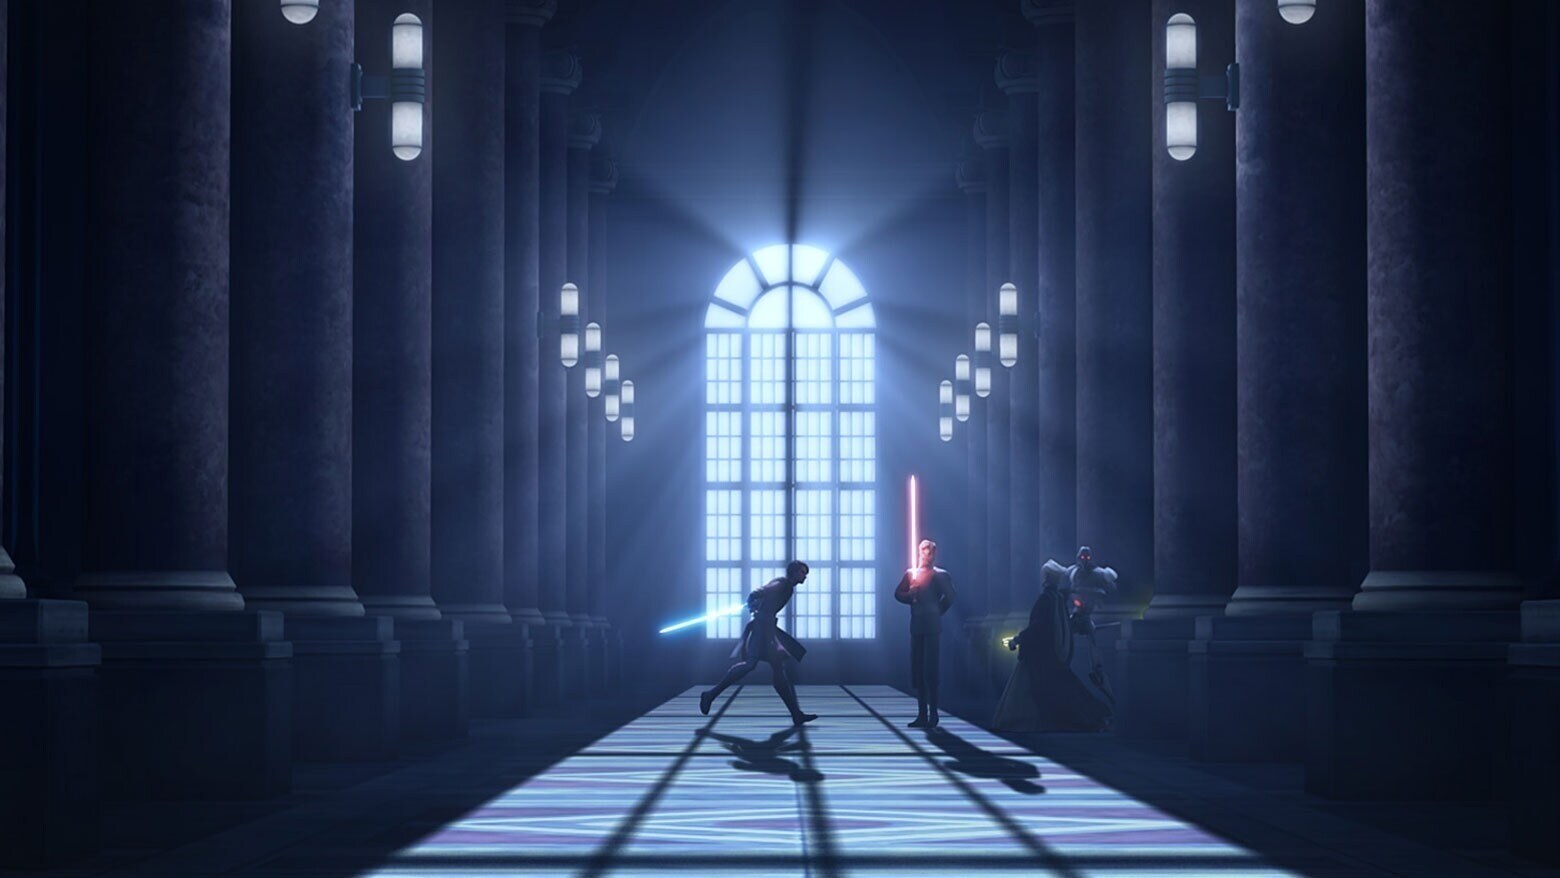 Anakin and Count Dooku with lightsabers, battling in The Clone Wars